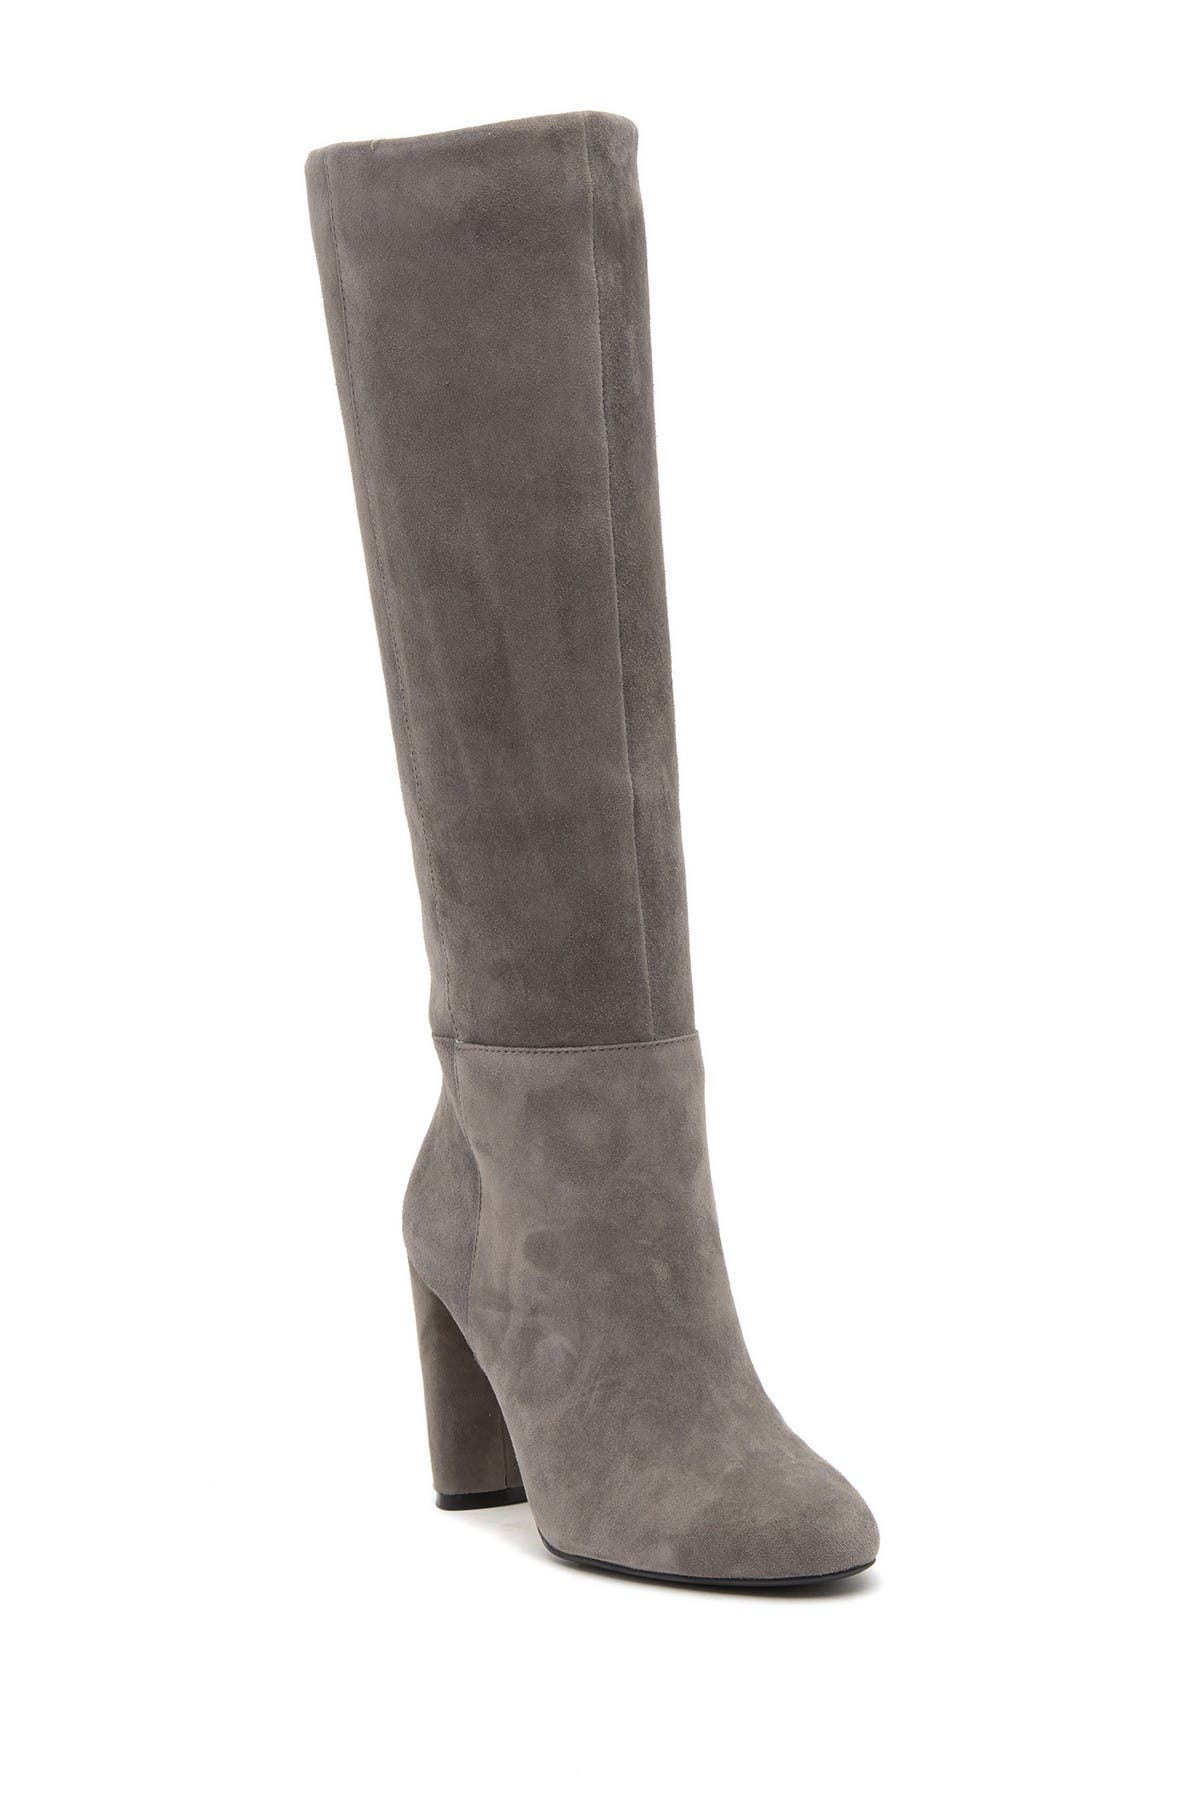 Vince Camuto | Femmie Tall Shaft Boot 